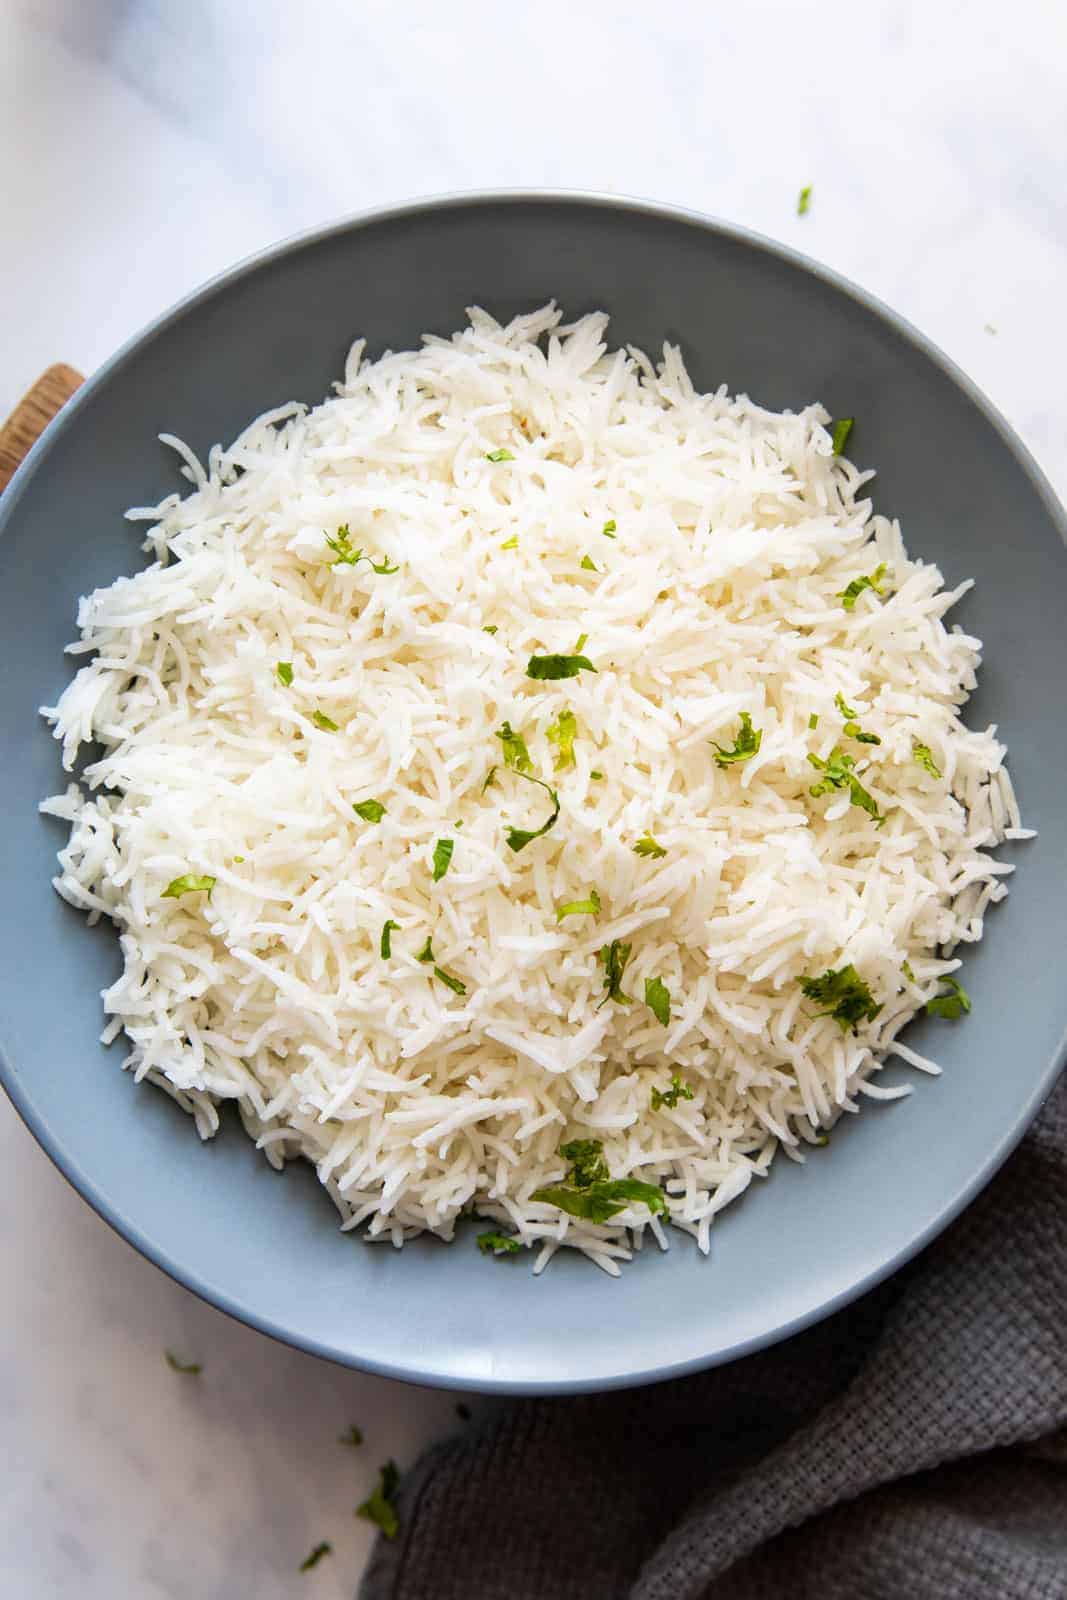 How to cook basmati rice thats served in a bowl in the picture